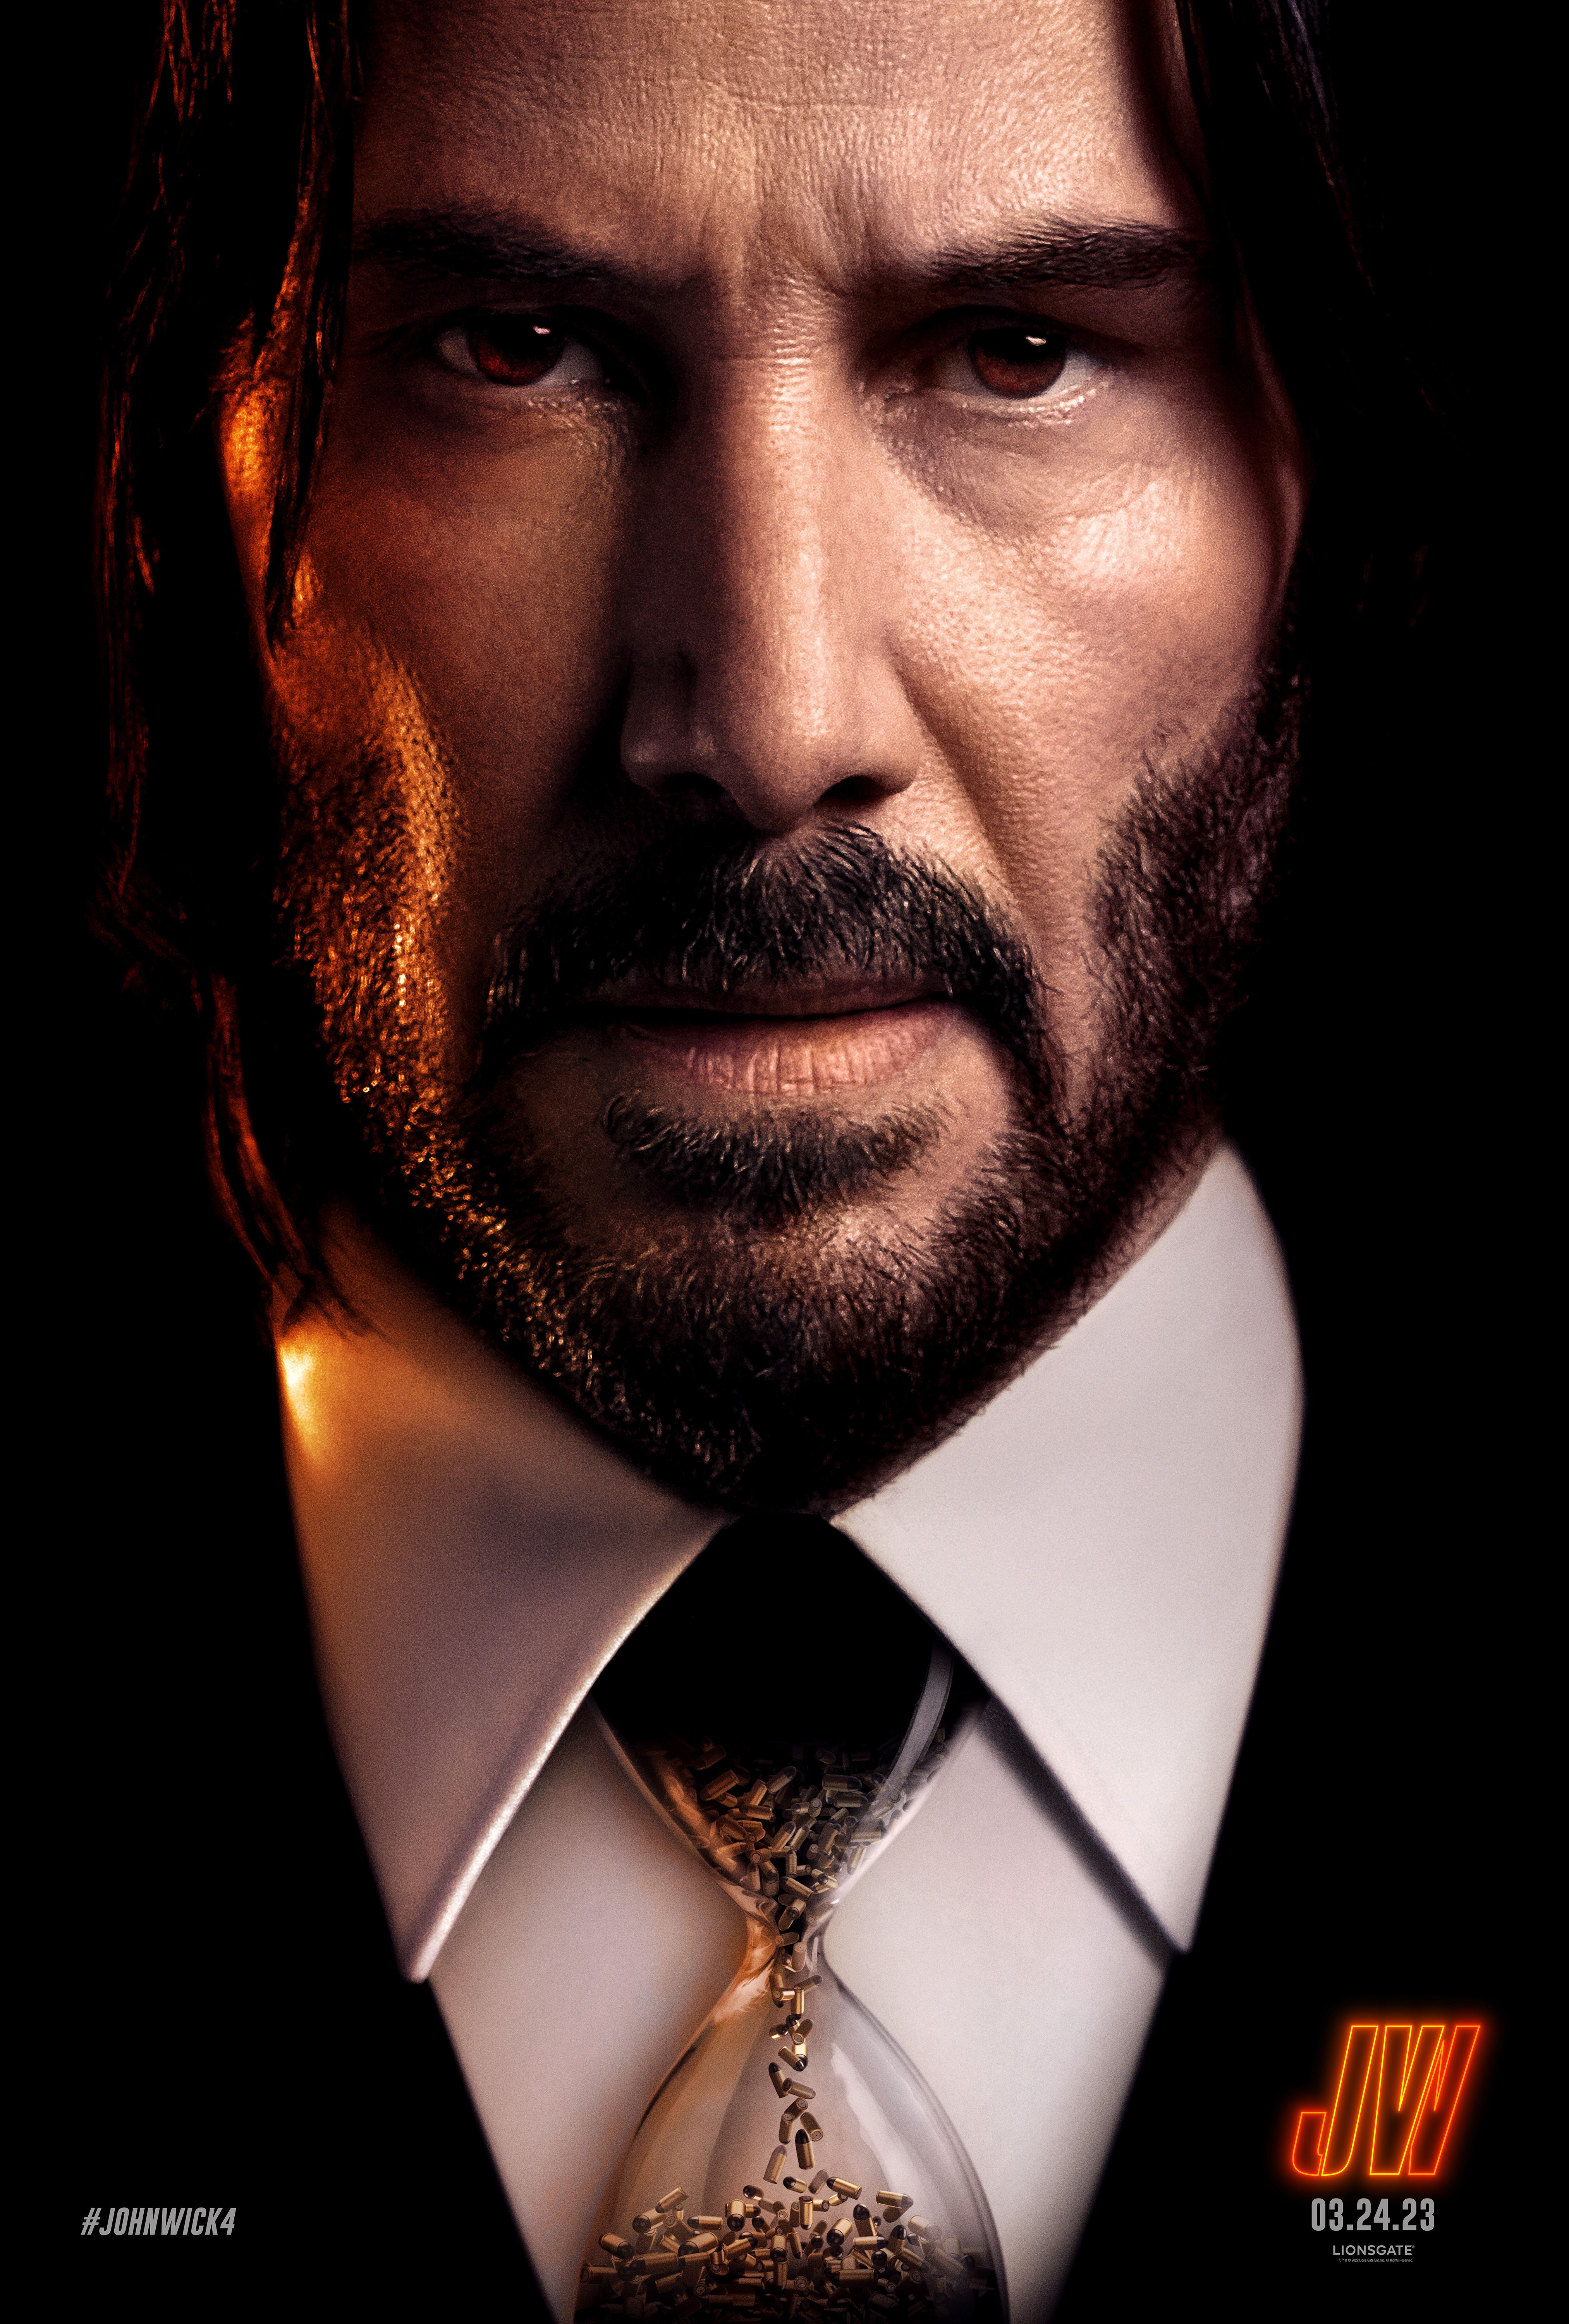 What to watch: Best movies new to streaming from John Wick 4 to The  Boogeyman